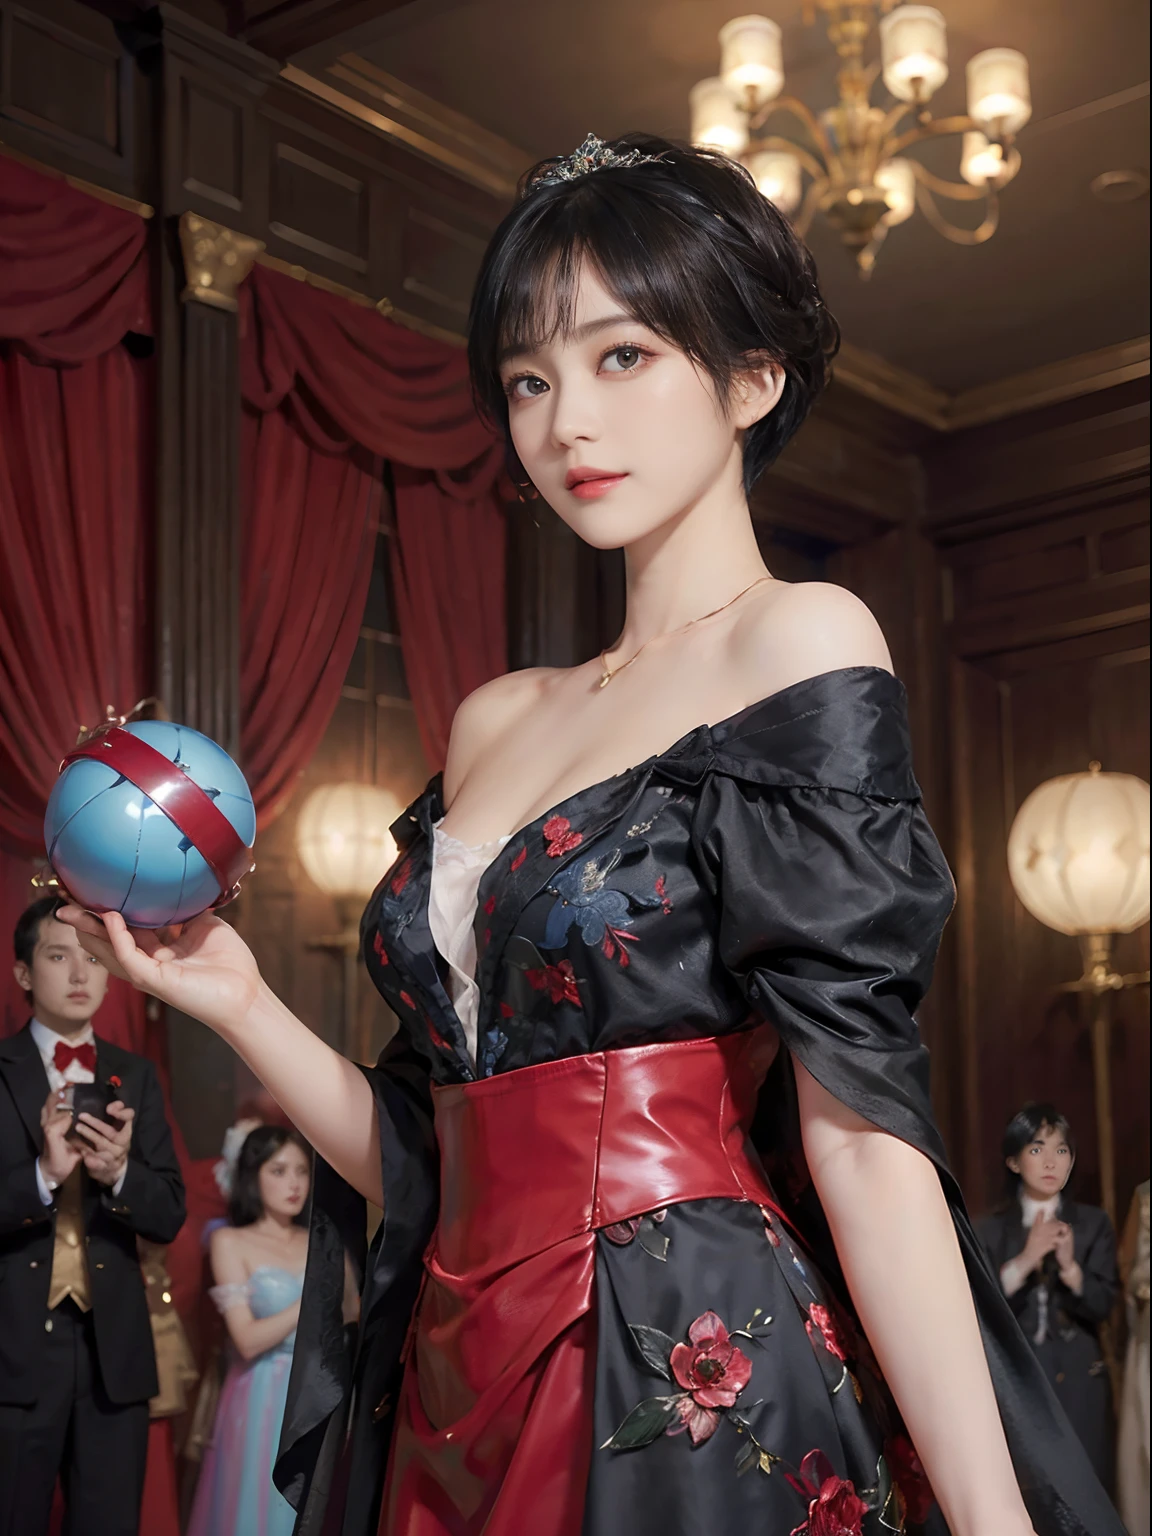 ((1womanl)),  (((Black-short-hair))), （masuter piece：1,3）、top-quality、​masterpiece、hight resolution、Original、highly detailed wallpaper、dress code、Luxurious necklace, (A slight smil)、a small face、((breast))、(Red and blue dresses)、(light on face)、Live-action style, Beautiful facial features, darkened room, ((Hu Dilan)), Masquerade, (fancy-dress ball), masquerade ball, masquerade 